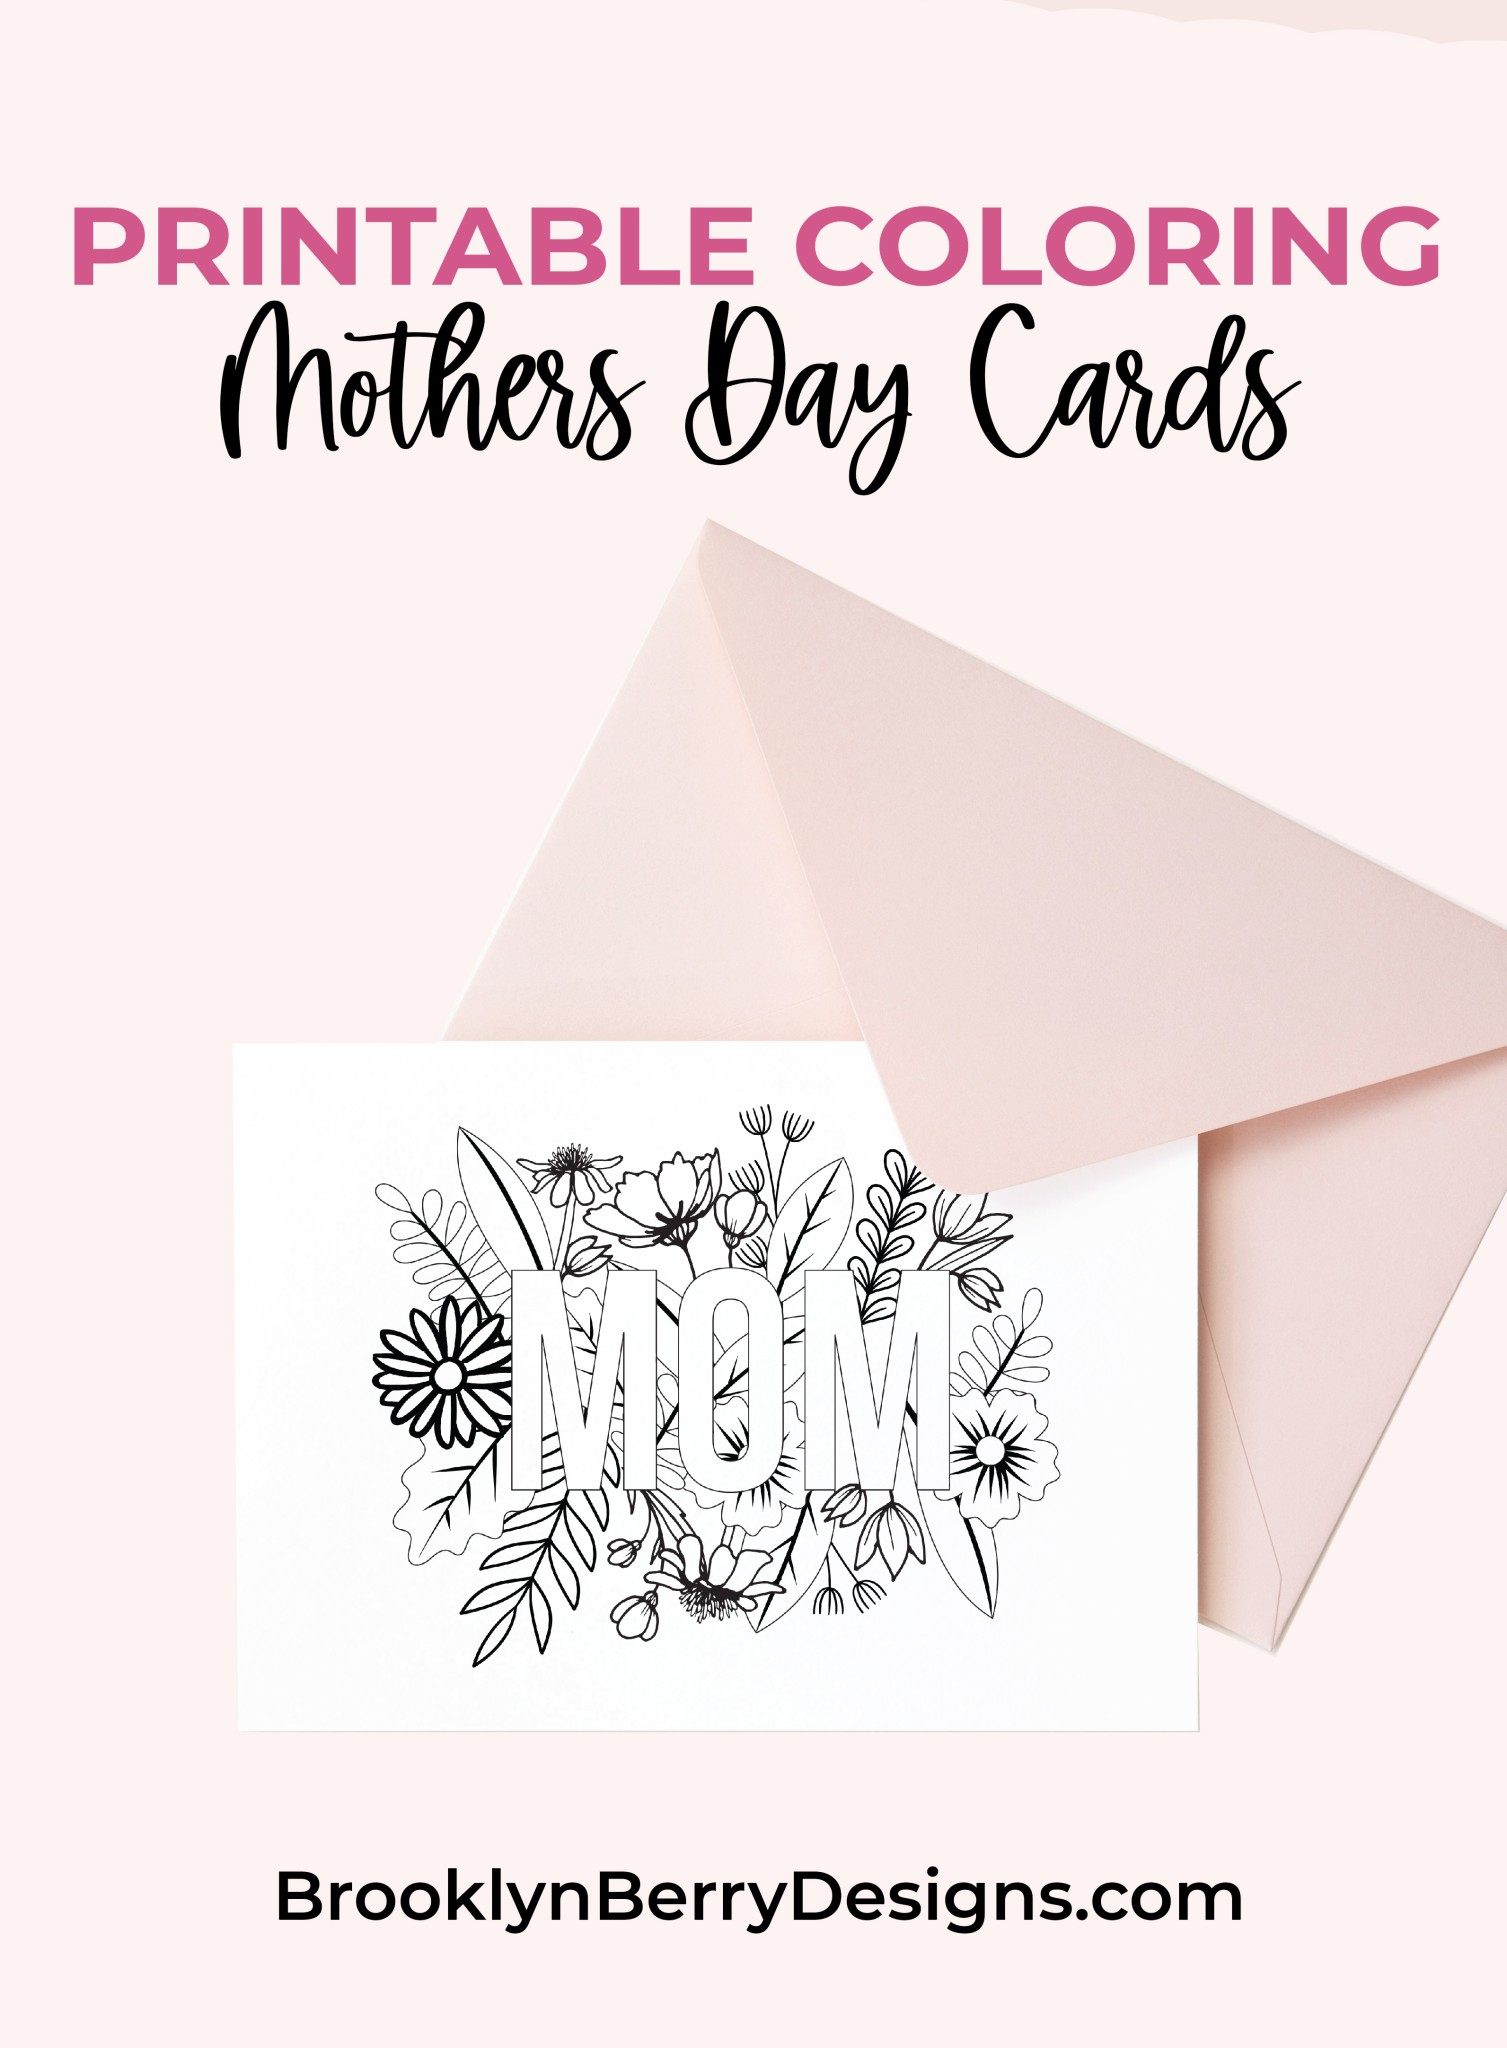 Celebrate your mom, grab these free printable Mothers Day cards and let her know how much you appreciate her. via @brookeberry